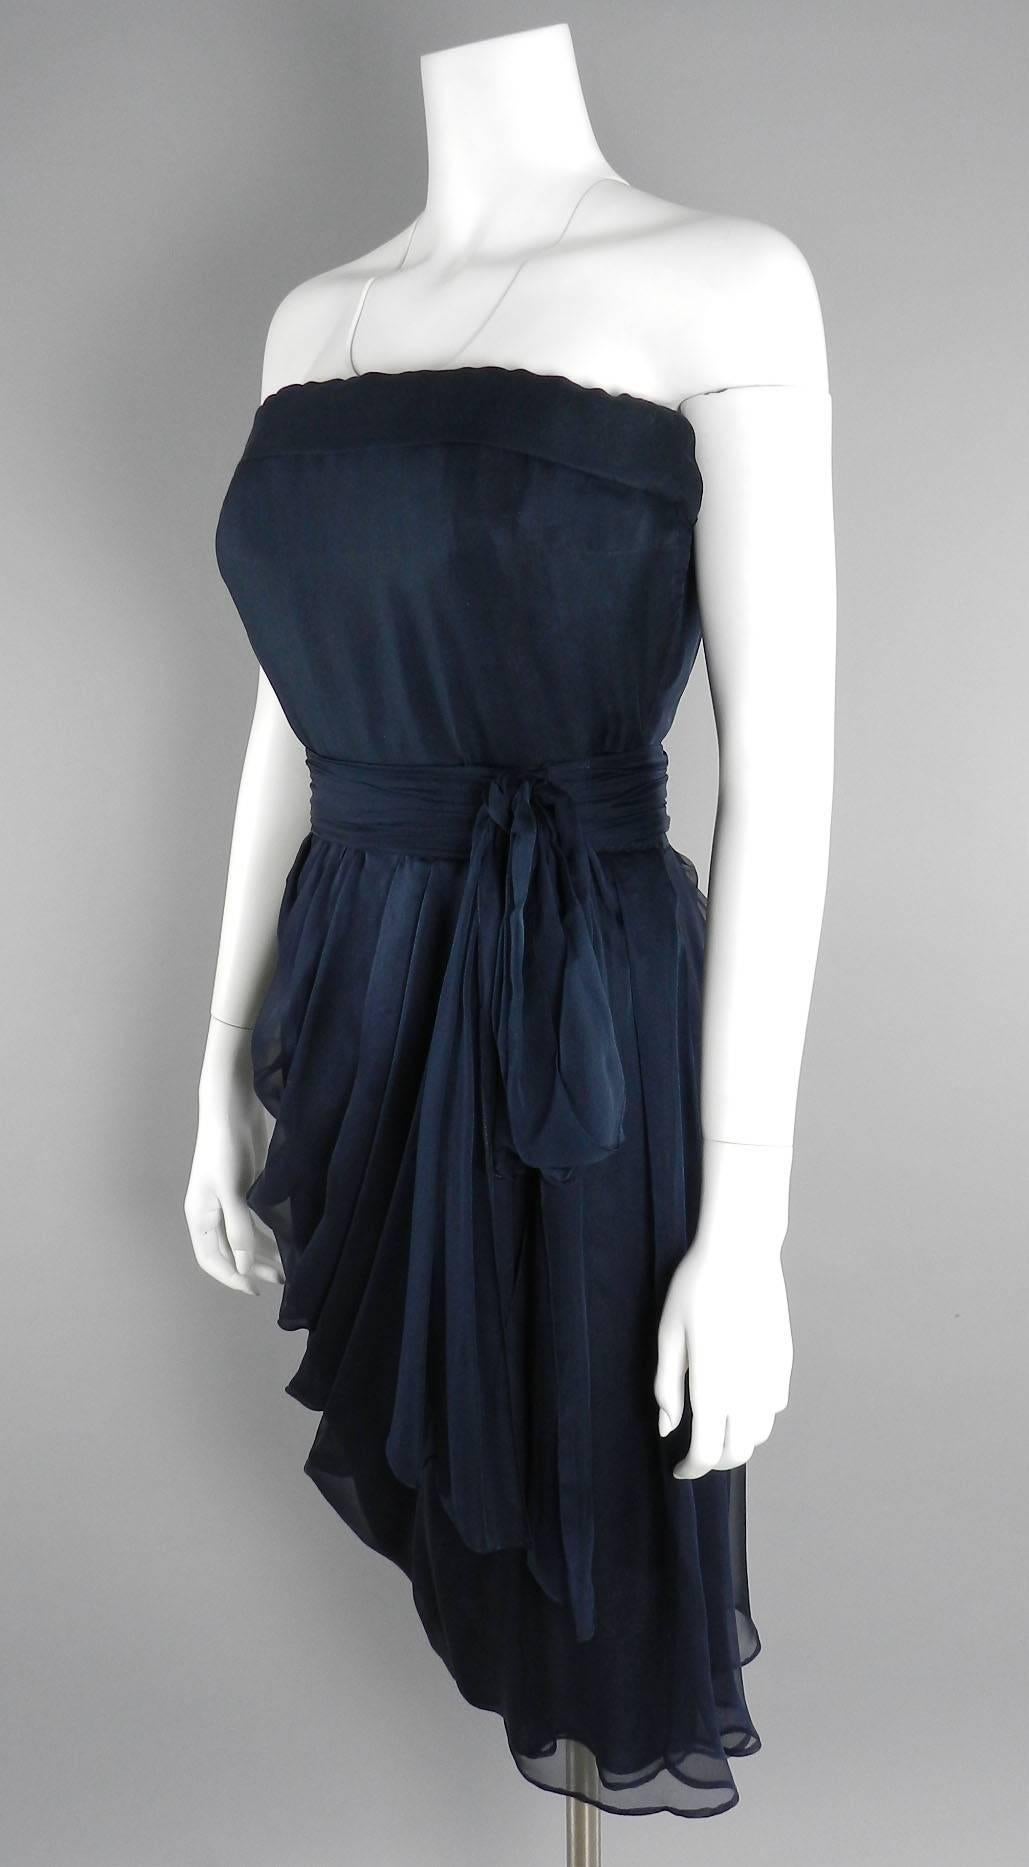 YSL Yves Saint Laurent vintage Haute Couture numbered dress circa 1980's. Black sheer silk chiffon with matching belt. Strapless design, zipper at side. Excellent vintage condition with no flaws to note. Garment designed to fit 36